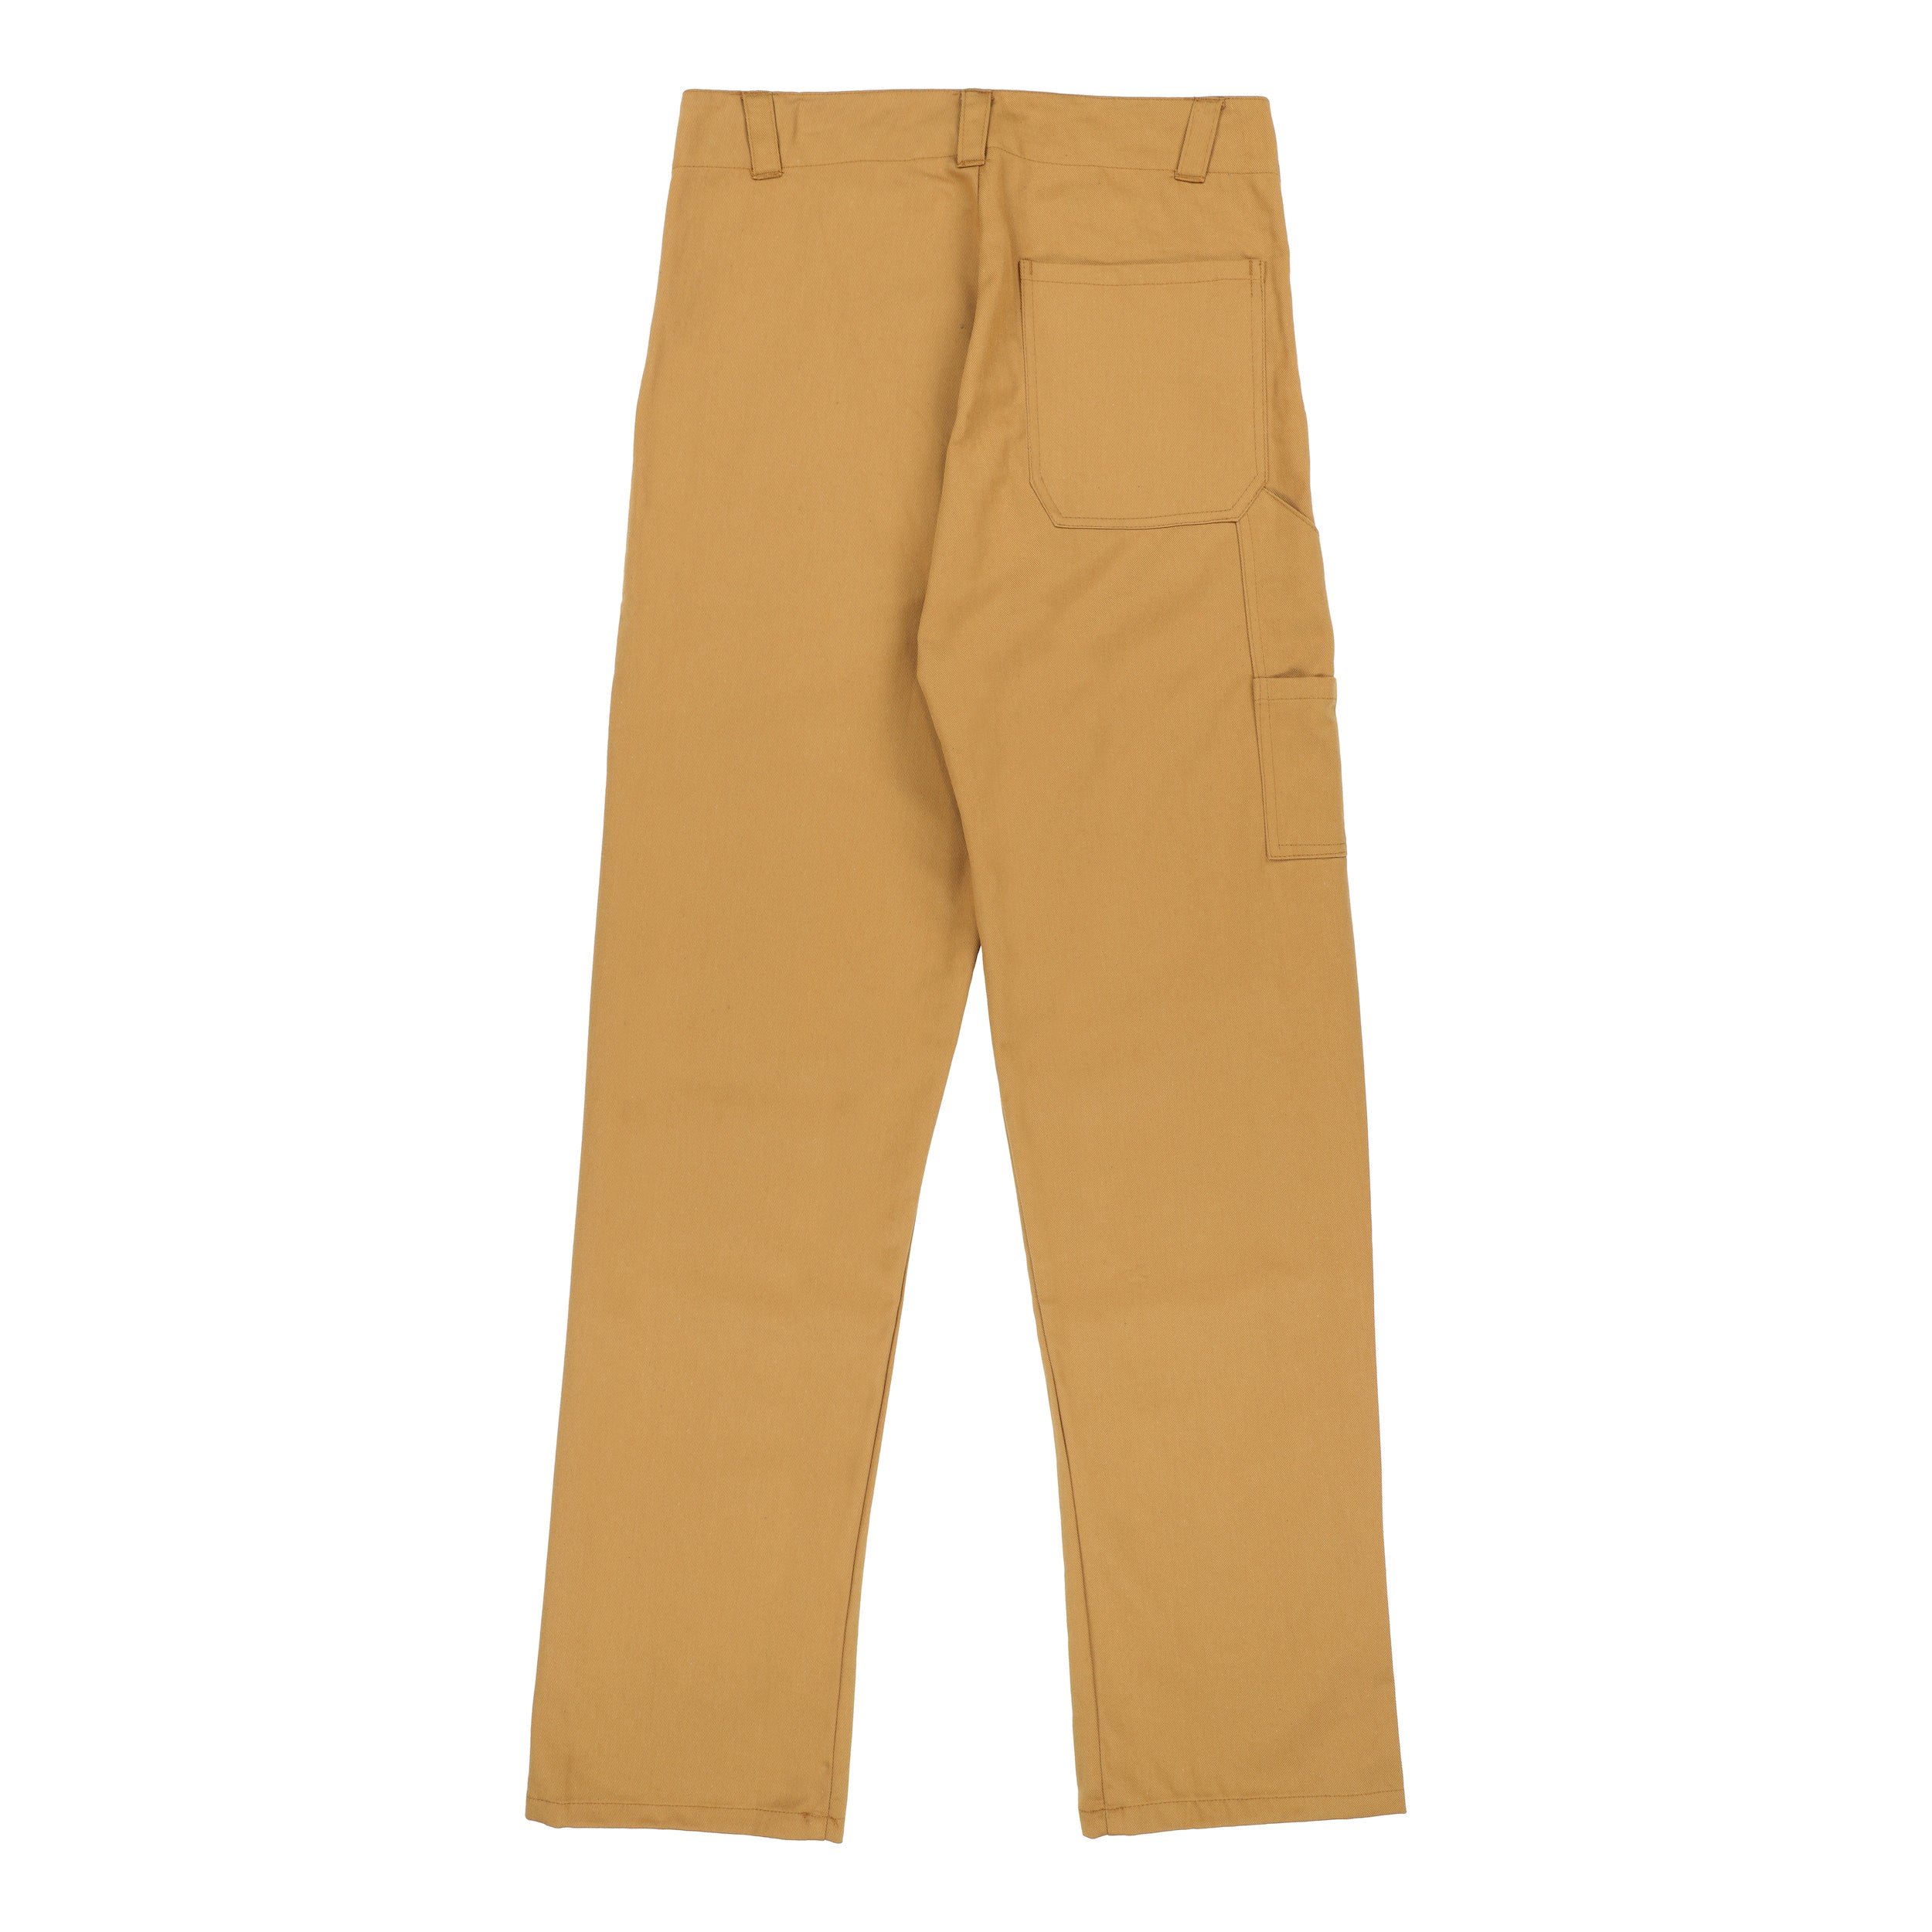 Carrier Company Men's Work Trouser in Tan Drill